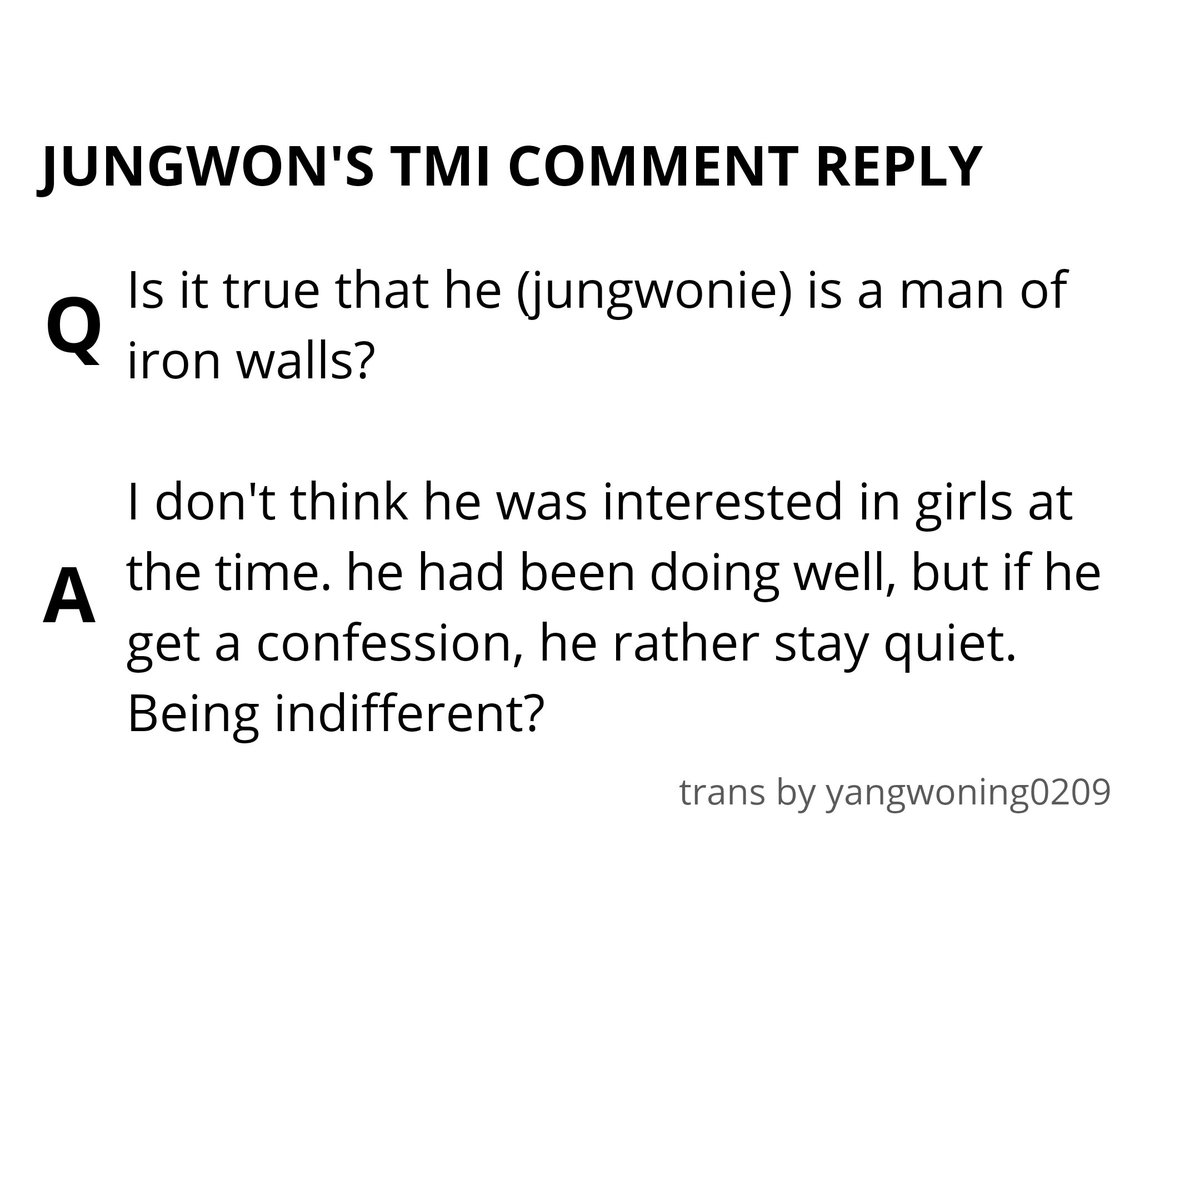 [17] iron wall man is like a cold man(?) KSKSKSKS THIS LITTLE BABIE DON'T KNOW TO INTERACT WITH GIRL YET JUNGWONIE IS THE CUTEST